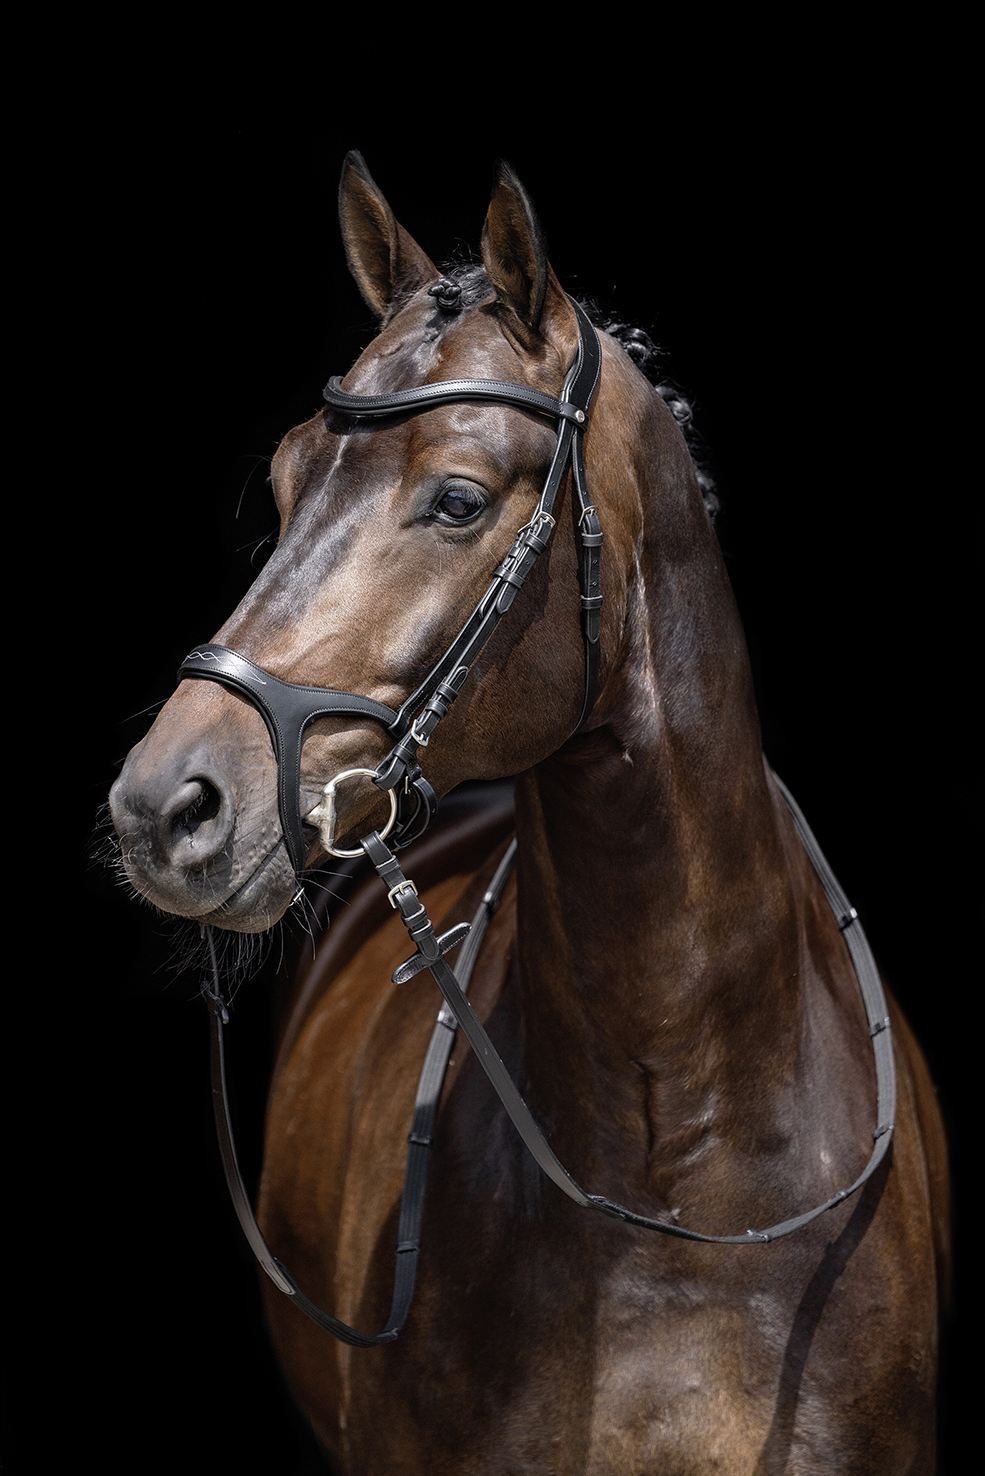 HKM Bridle Anatomic Sports - Just Horse Riders